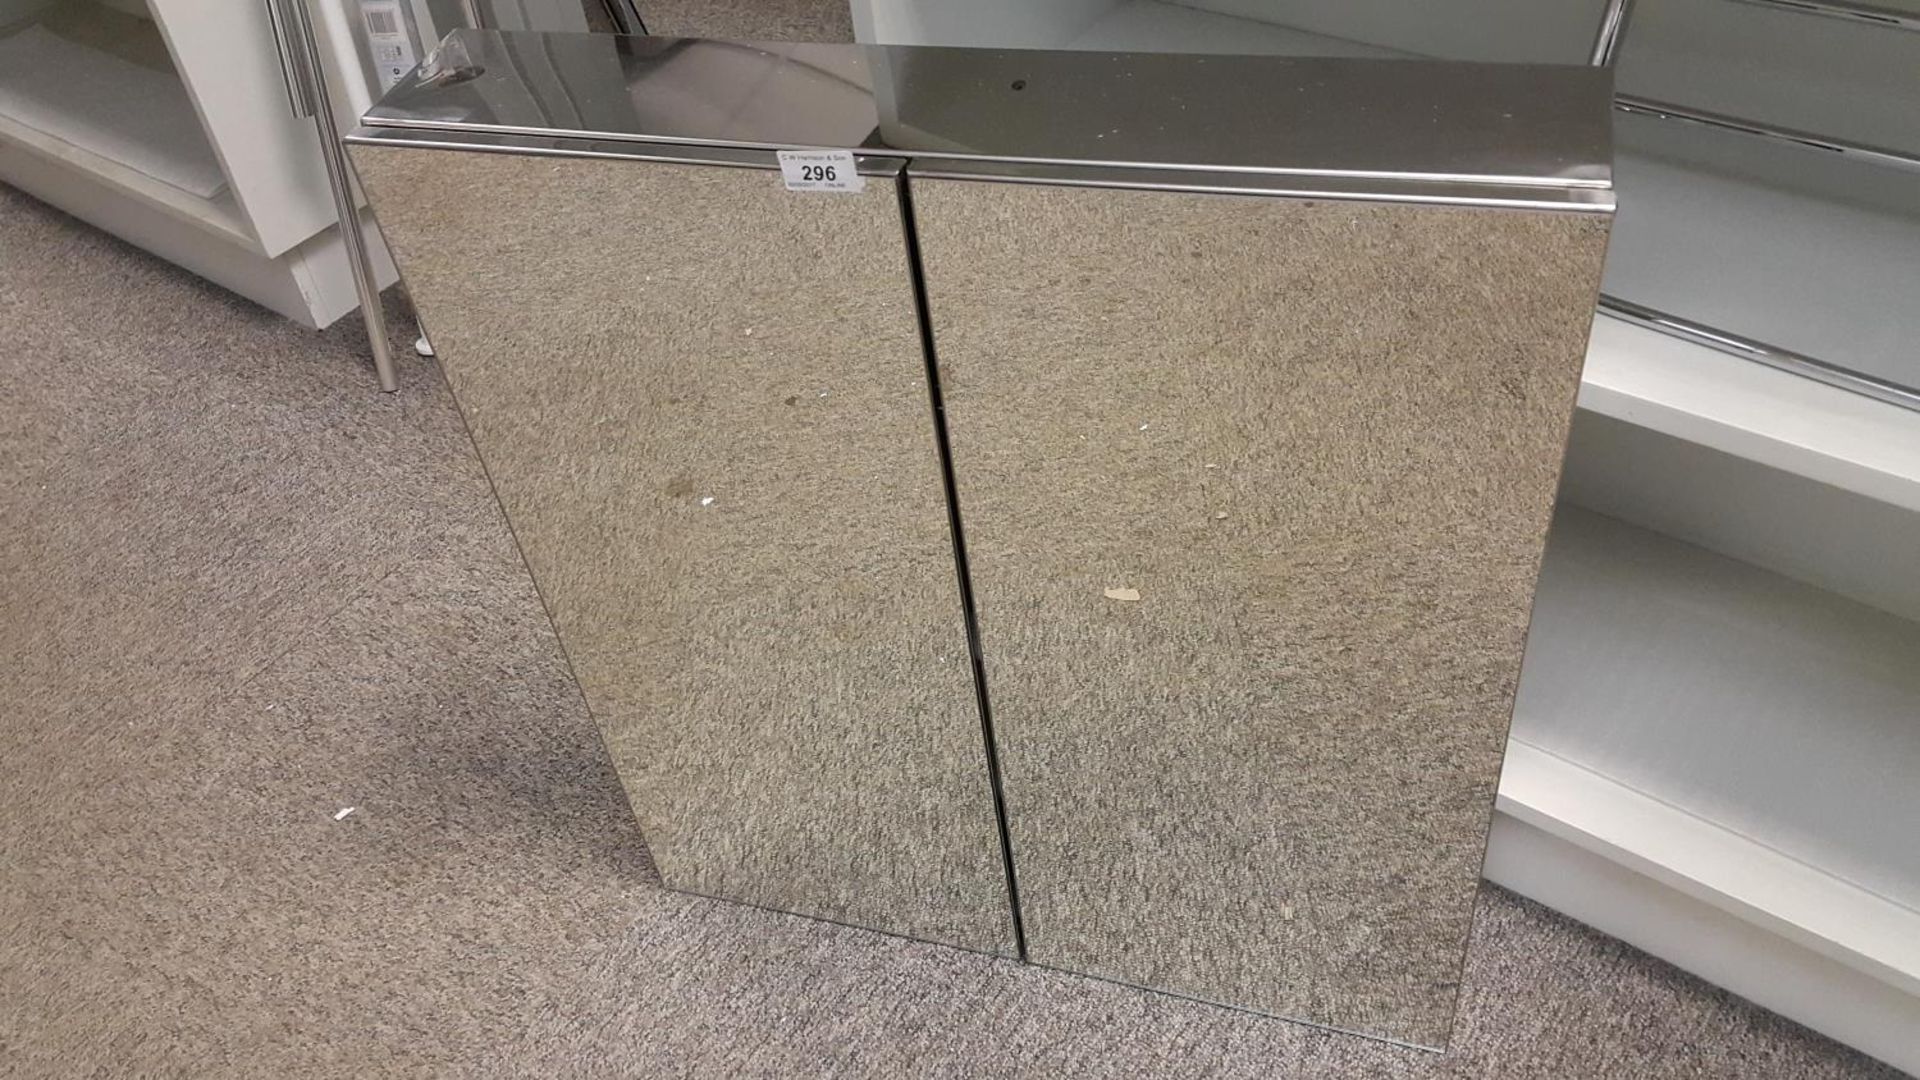 600x670 double mirrored steel cabinet RRP £219 - Image 2 of 2